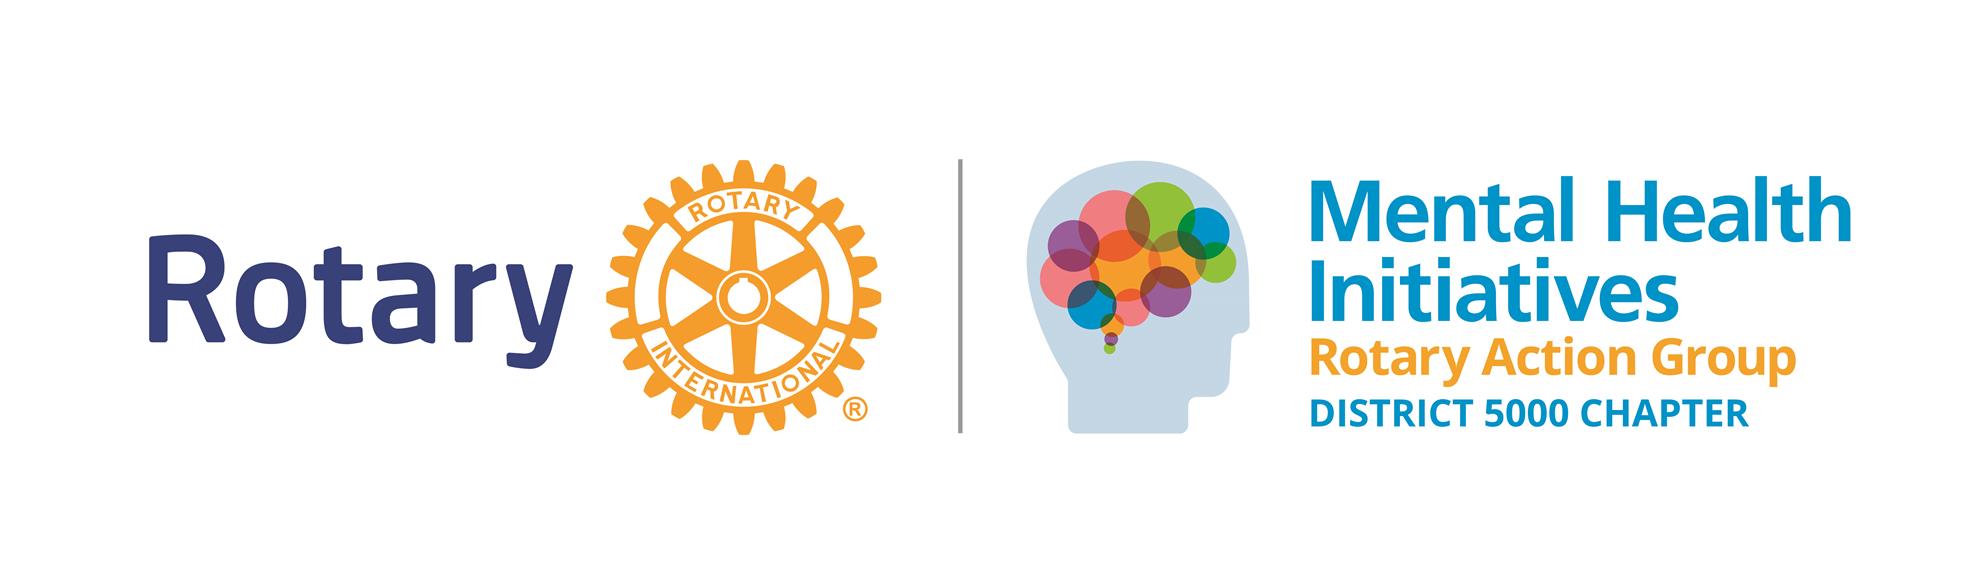 Mental Health Initiatives Rotary Action Group District 5000 Chapter